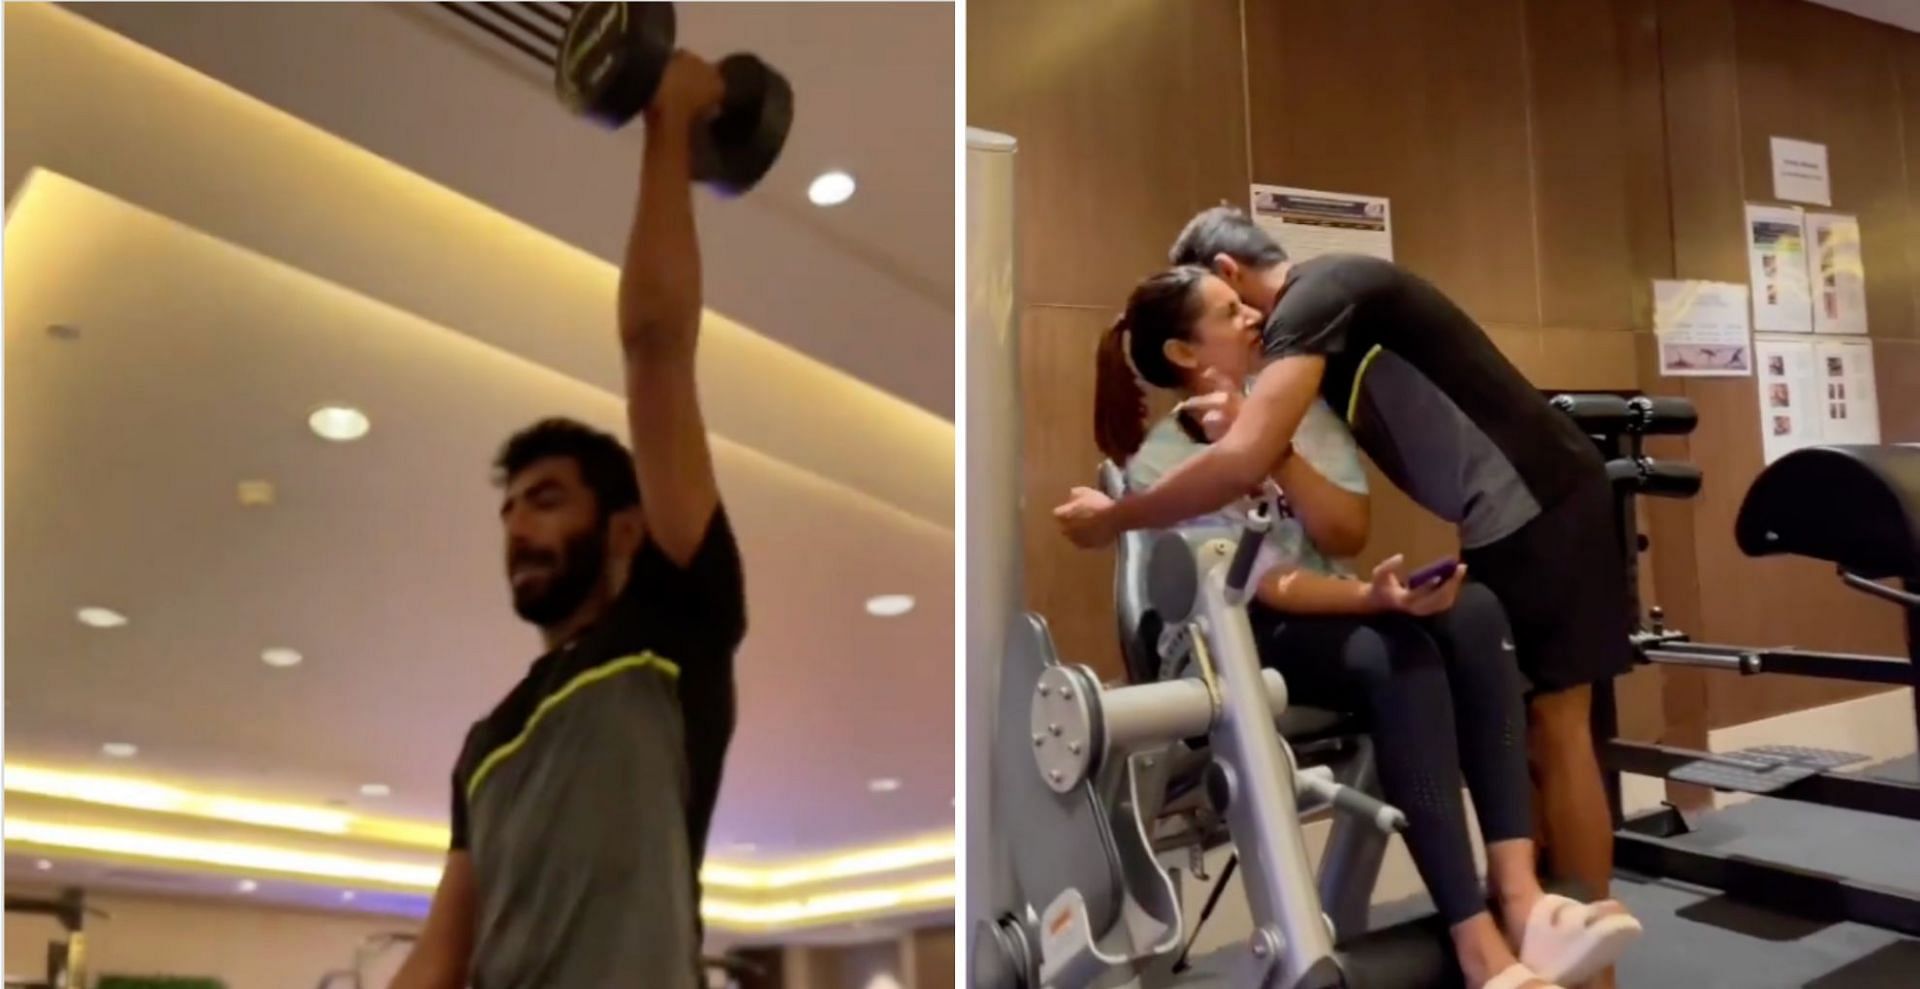 Bumrah shares a glimpse of his gym session (Credits: Jasprit Bumrah Instagram)